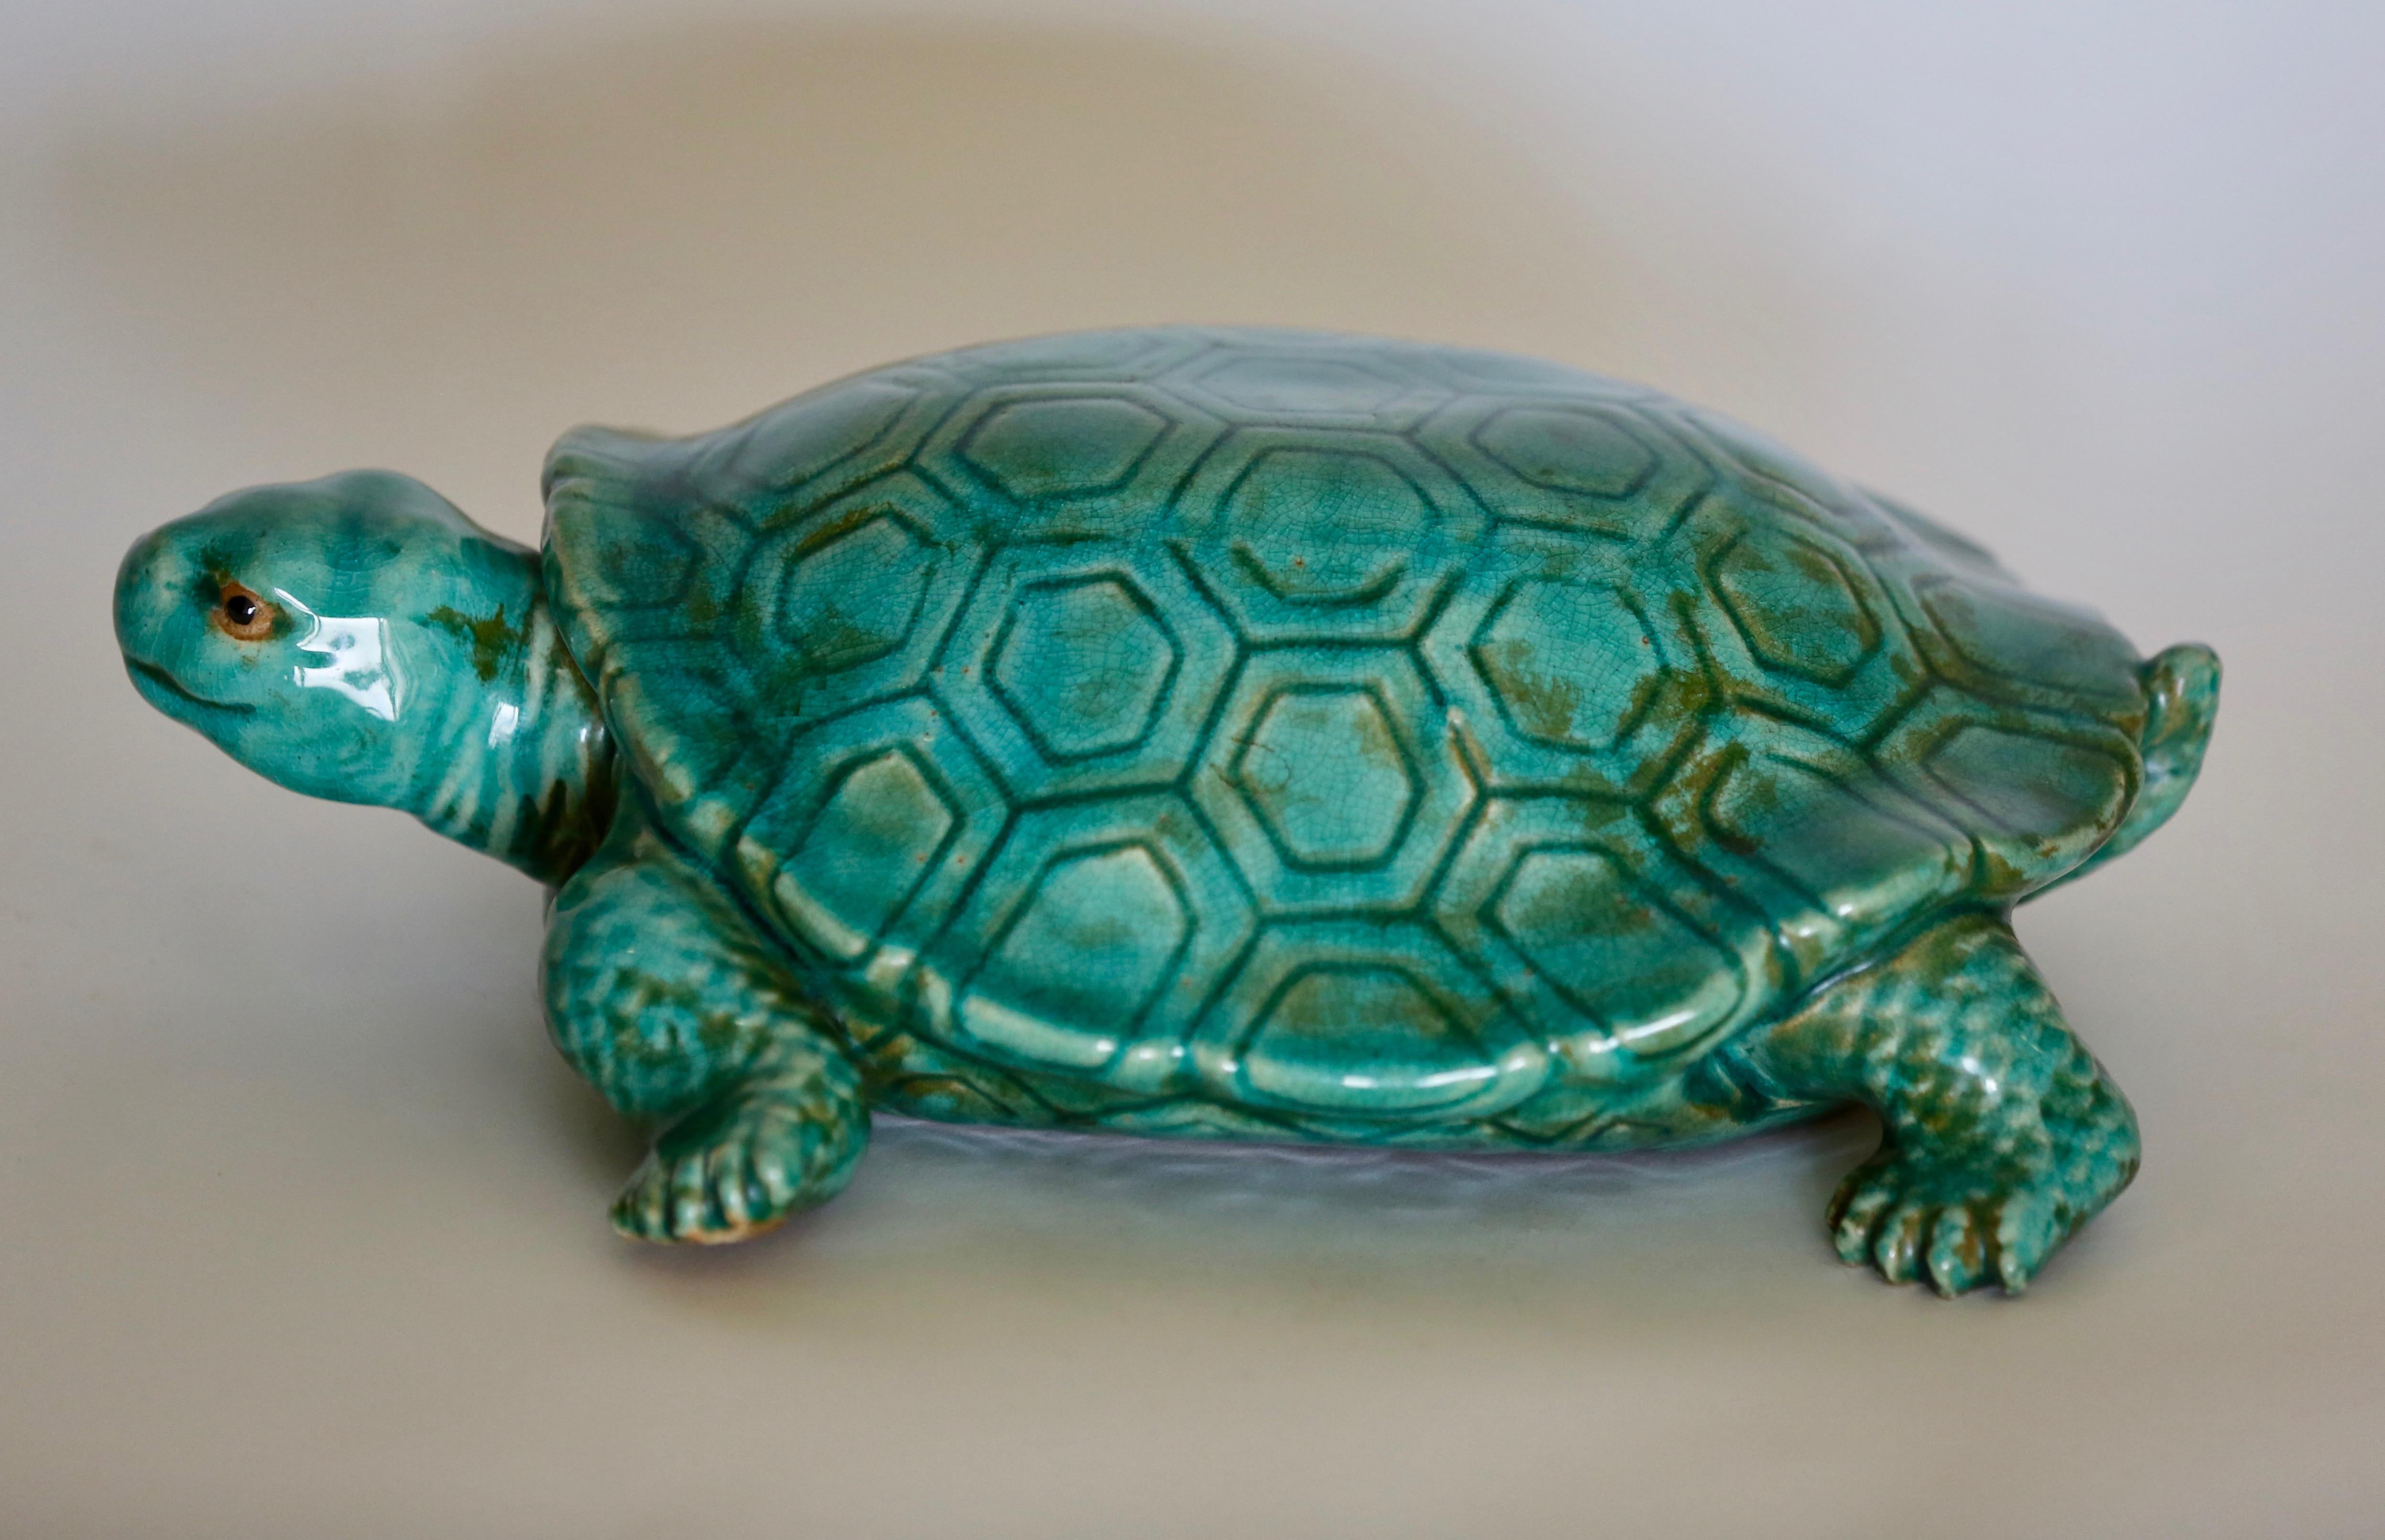 Big ceramic turtle from the 1950s.
Italy.
Dimensions: 40 x 30 x 13 cm.